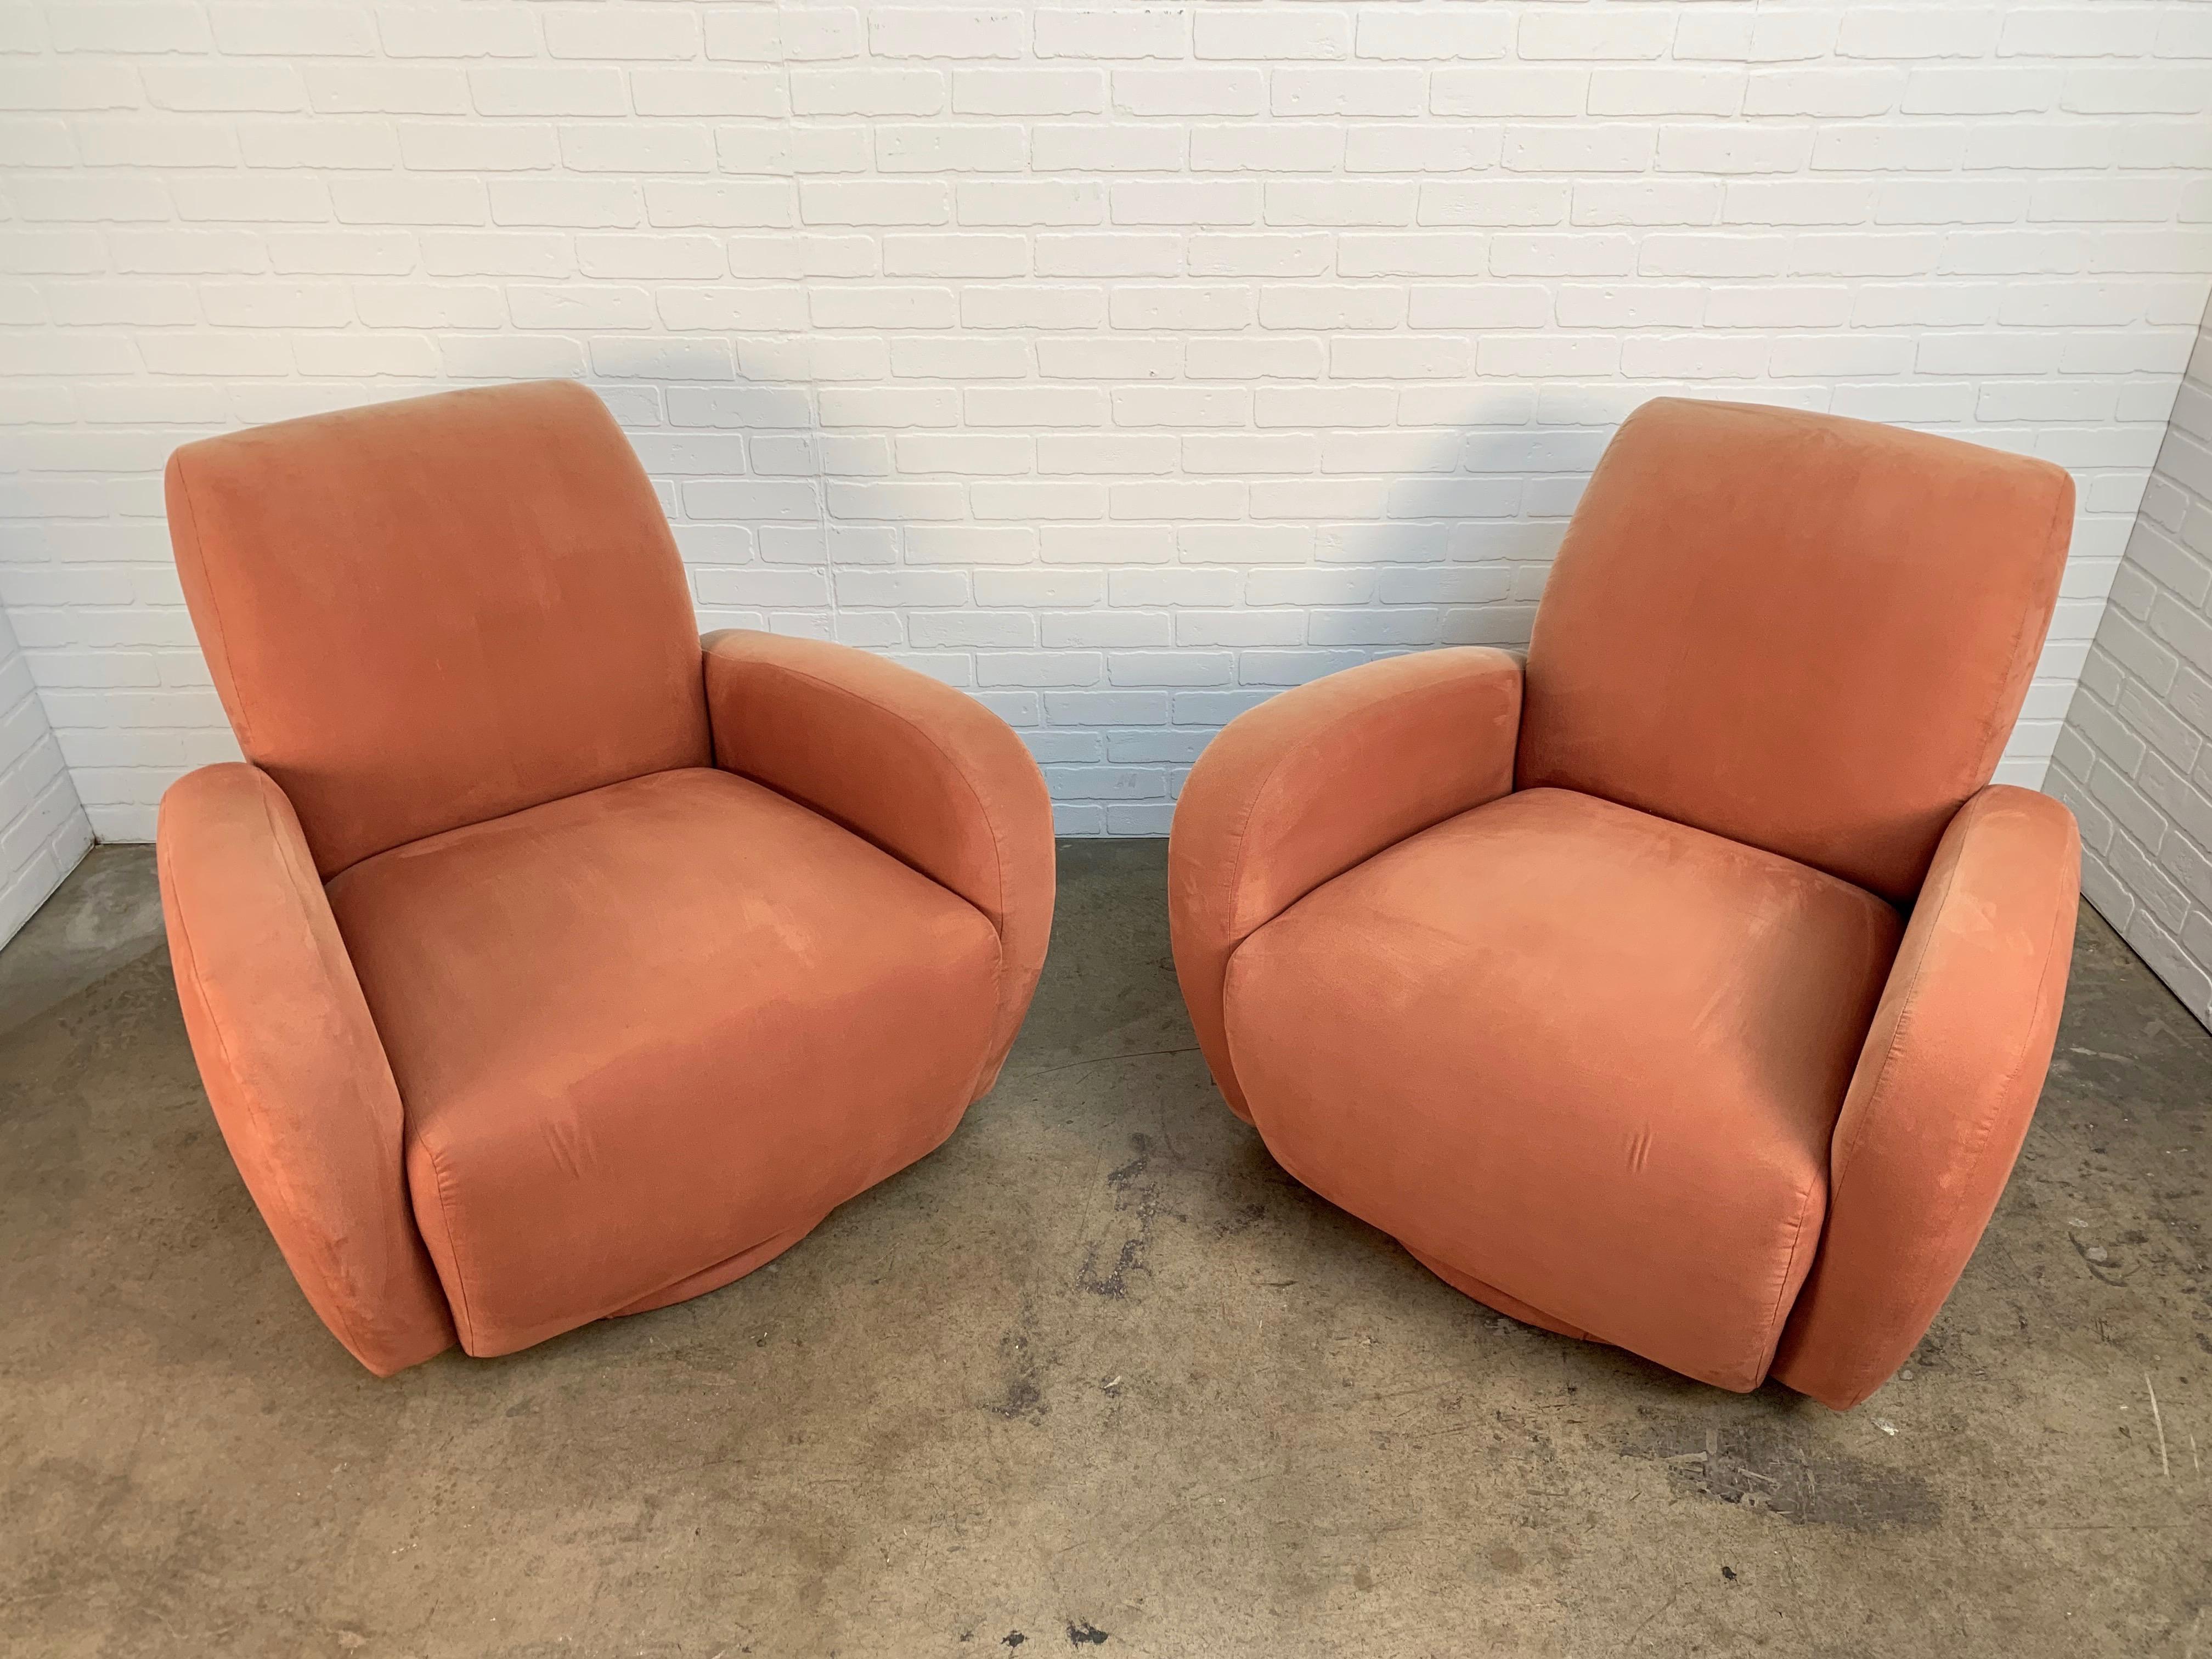 Upholstery Modernist Swivel Club Chairs